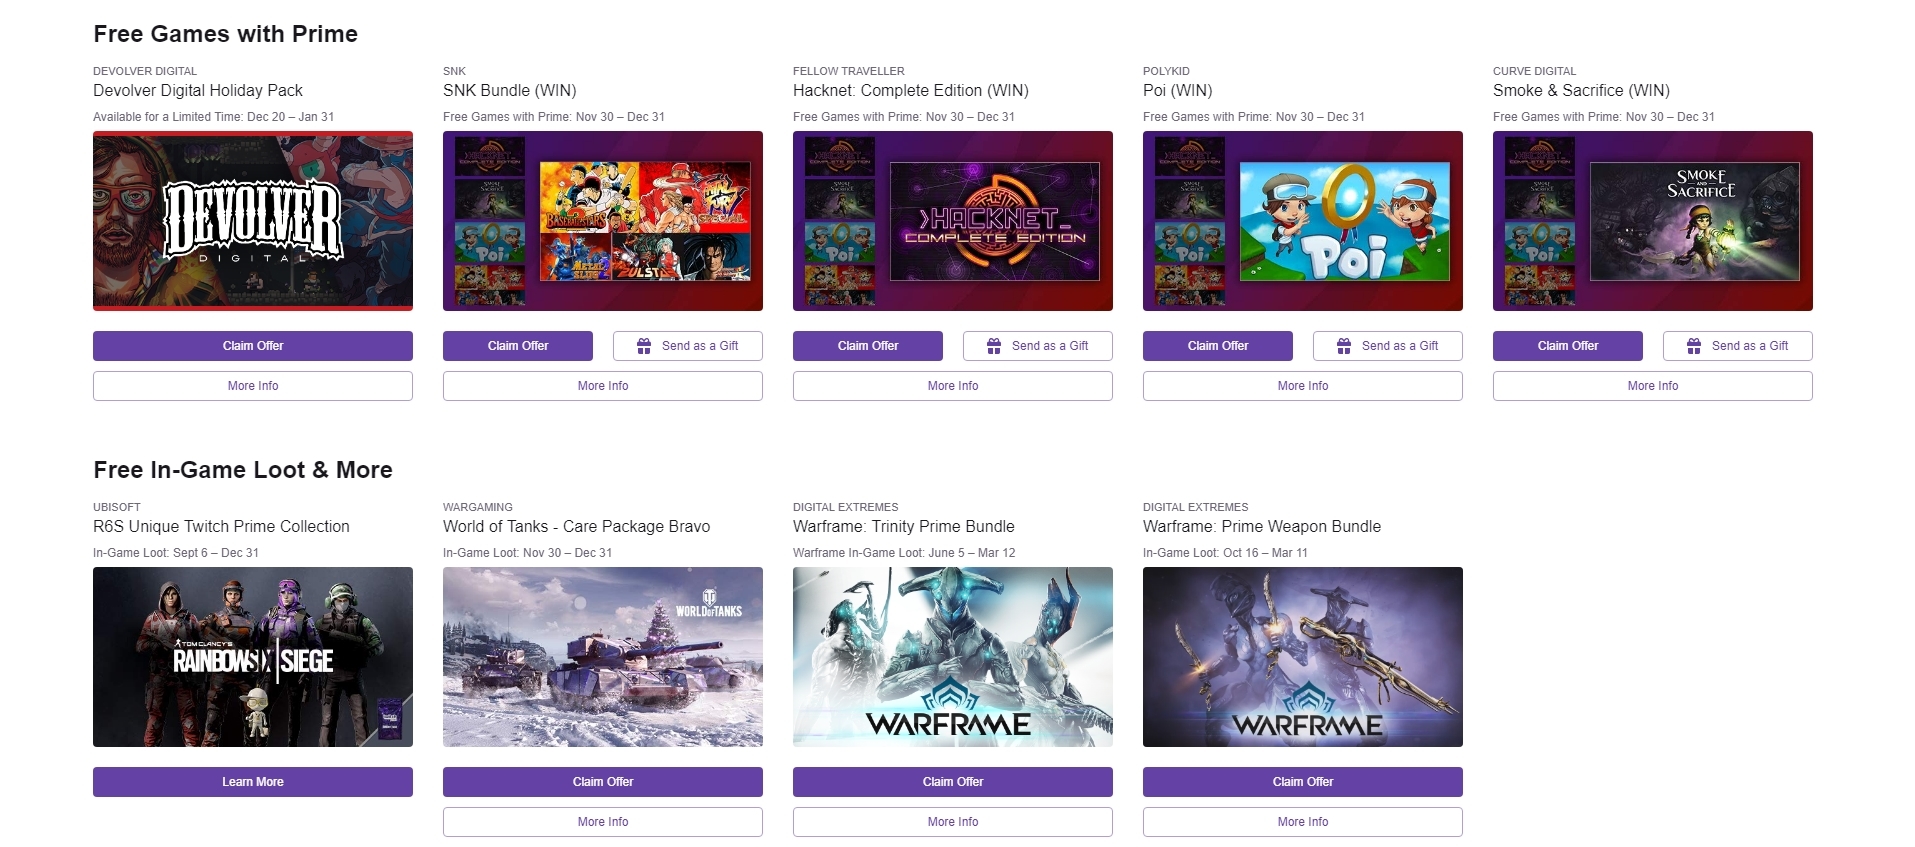 Get free Heroes of the Storm loot with Twitch Prime